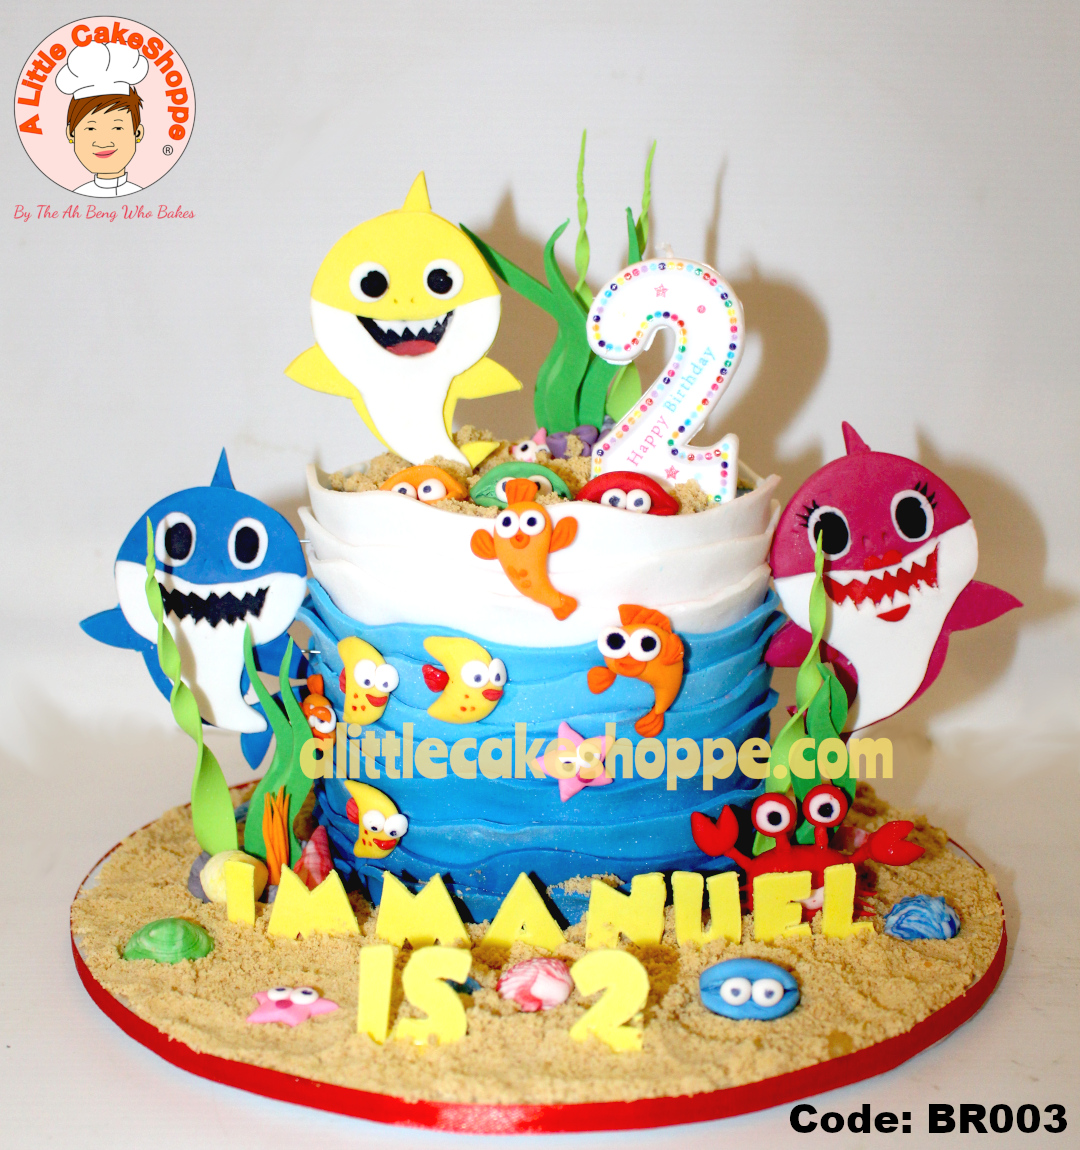 Best Cake Shop Singapore Delivery Best Customised Cake Shop Singapore customise cake custom cake 2D 3D birthday cake cupcakes desserts wedding corporate events anniversary 1st birthday 21st birthday fondant fresh cream buttercream cakes alittlecakeshoppe a little cake shoppe compliments review singapore bakers SG cake shop cakeshop ah beng who bakes sgbakes novelty cakes sgcakes licensed sfa nea cake delivery celebration cakes kids birthday cake surprise cake adult children parenting baby shark